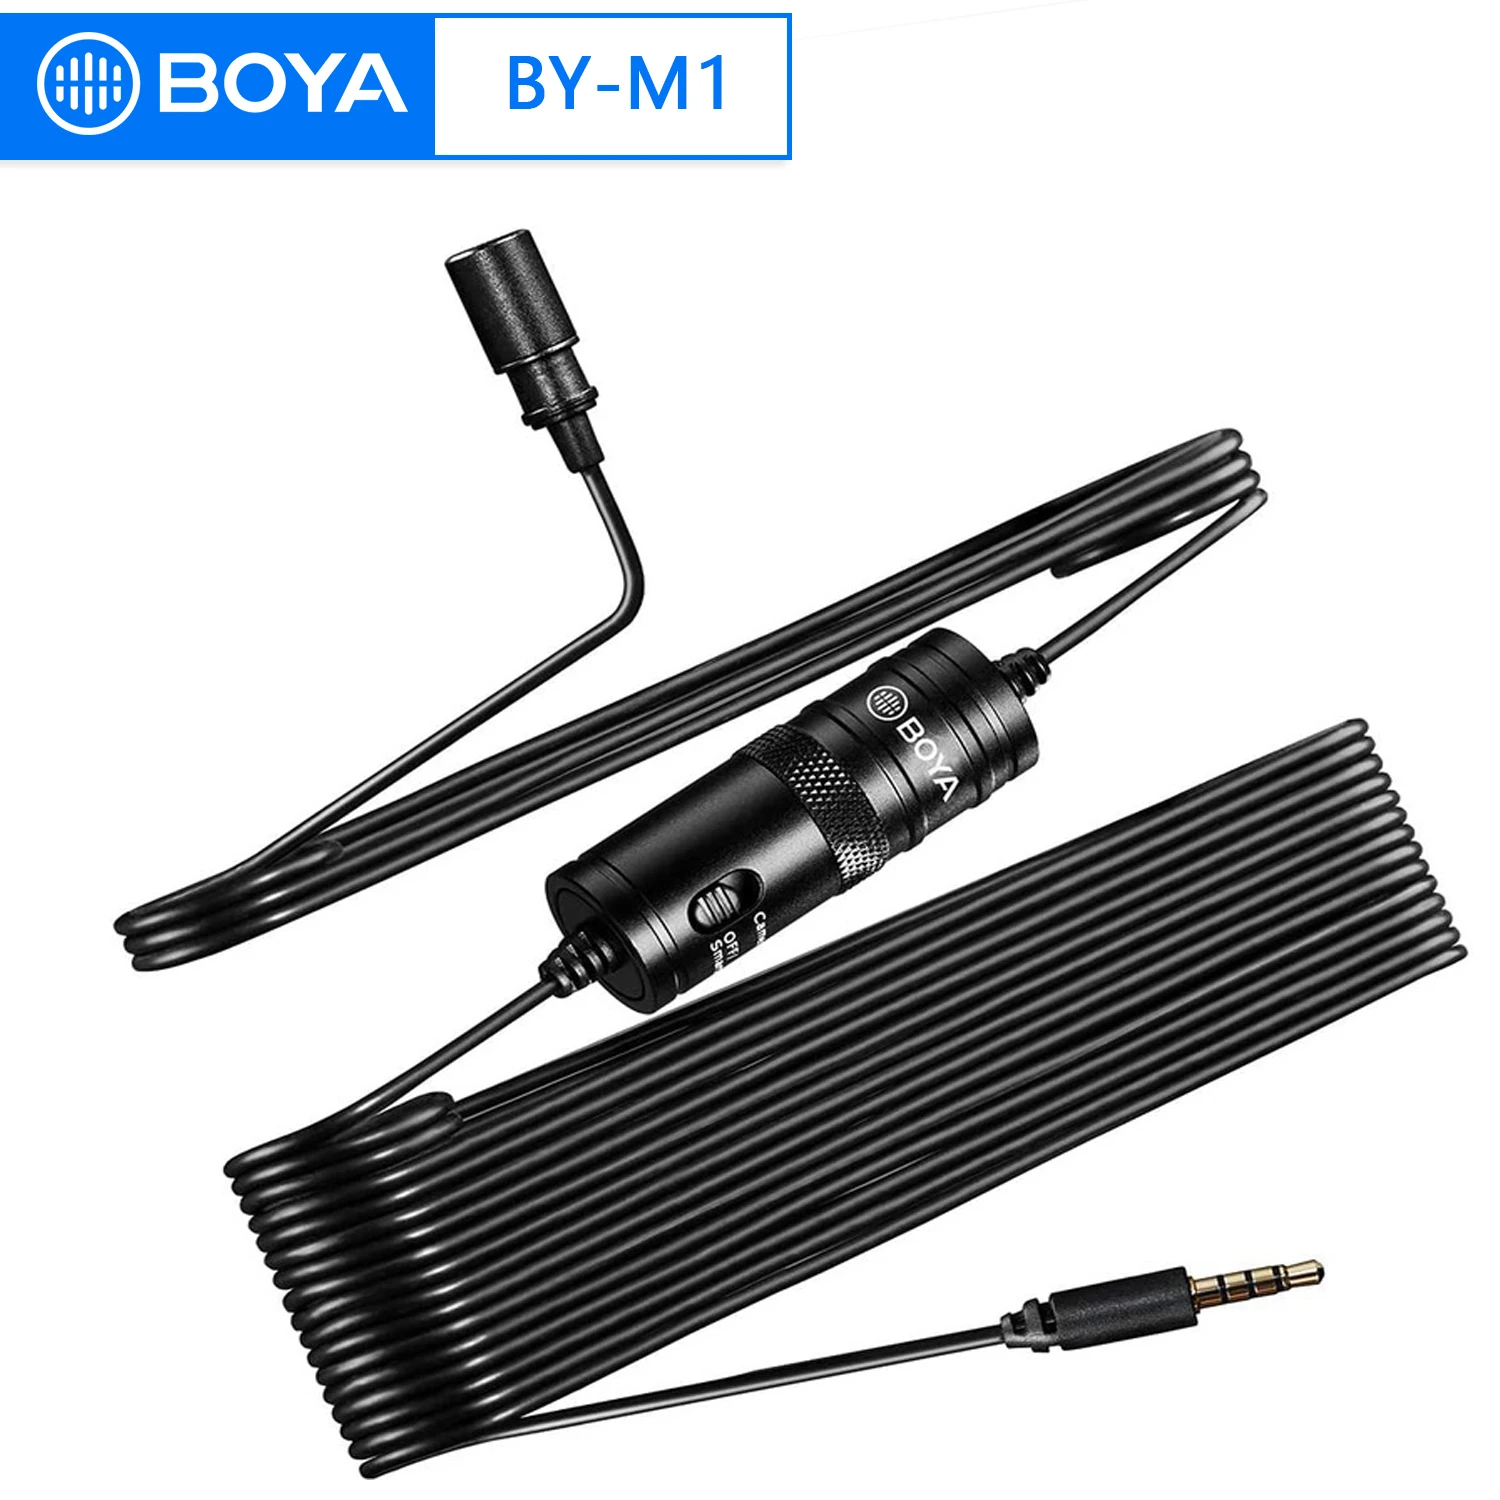 

BOYA BY-M1 3.5mm Professionnel Condenser Lavalier Lapel Microphone for iphone PC Android DSLR Cameras Youtube Recording 6m Mic